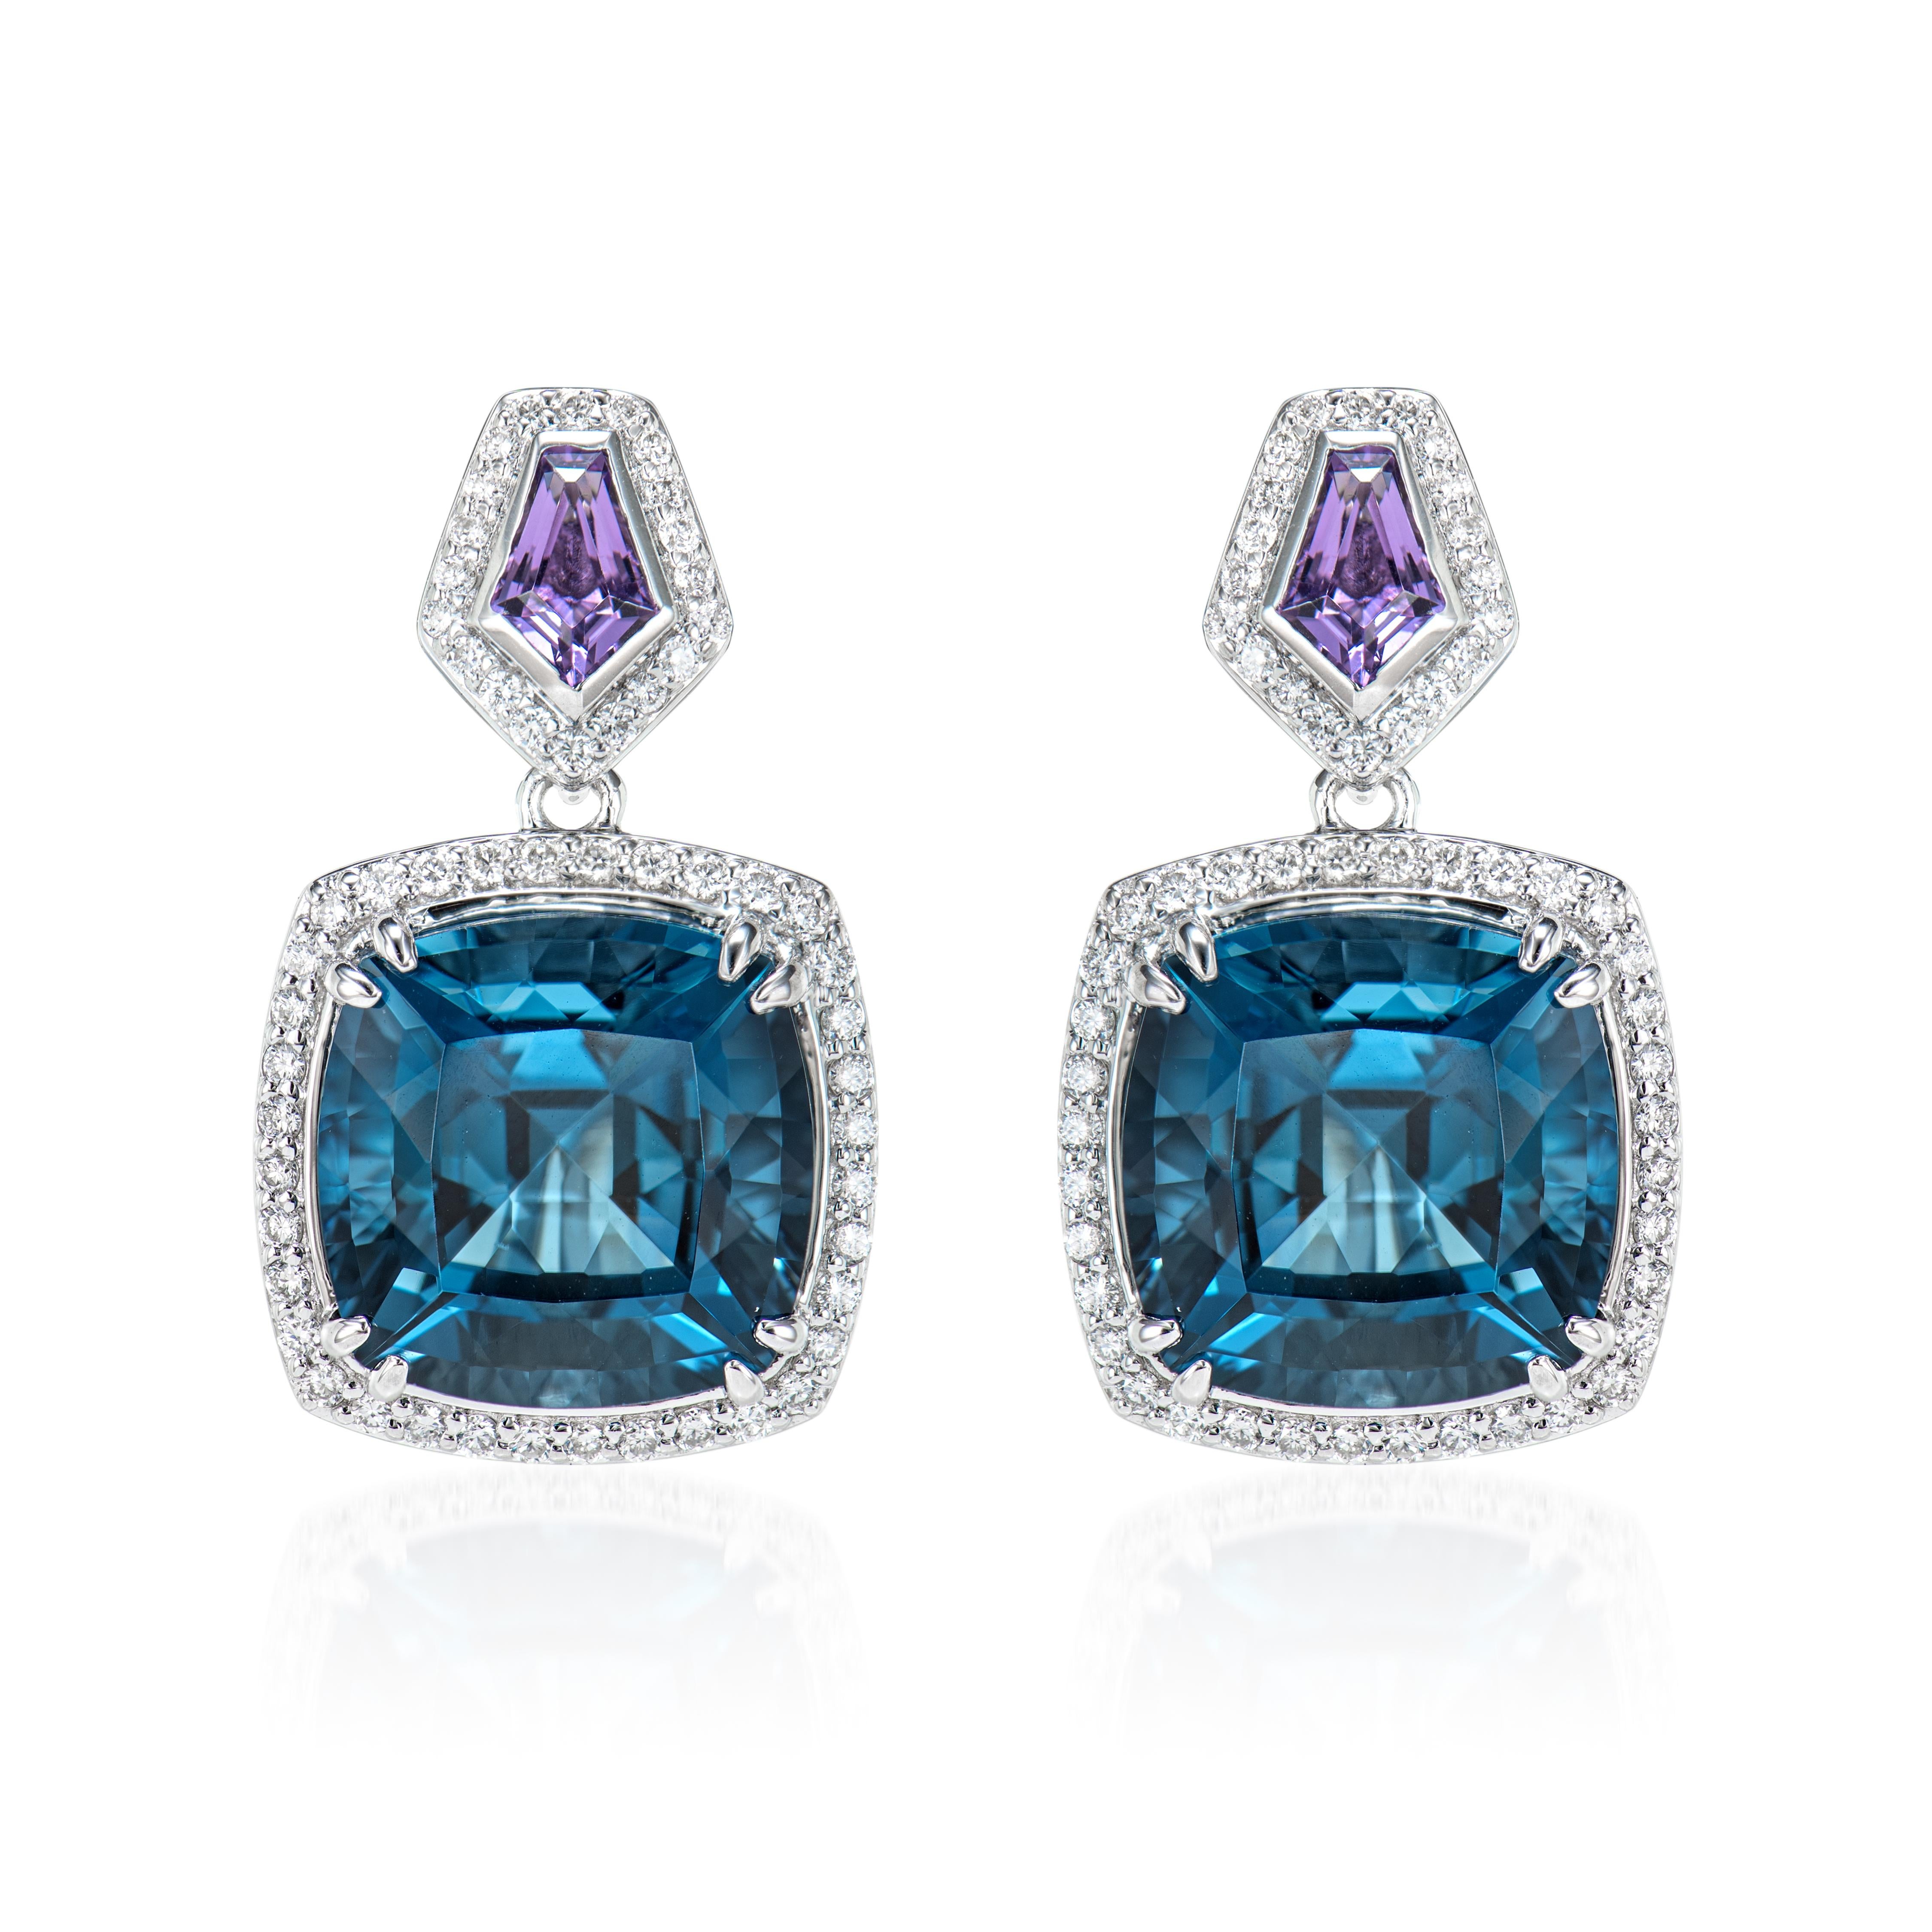 Contemporary 18.43 Carat London Blue Topaz Drop Earrings in 18KWG with Amethyst and Diamond. For Sale